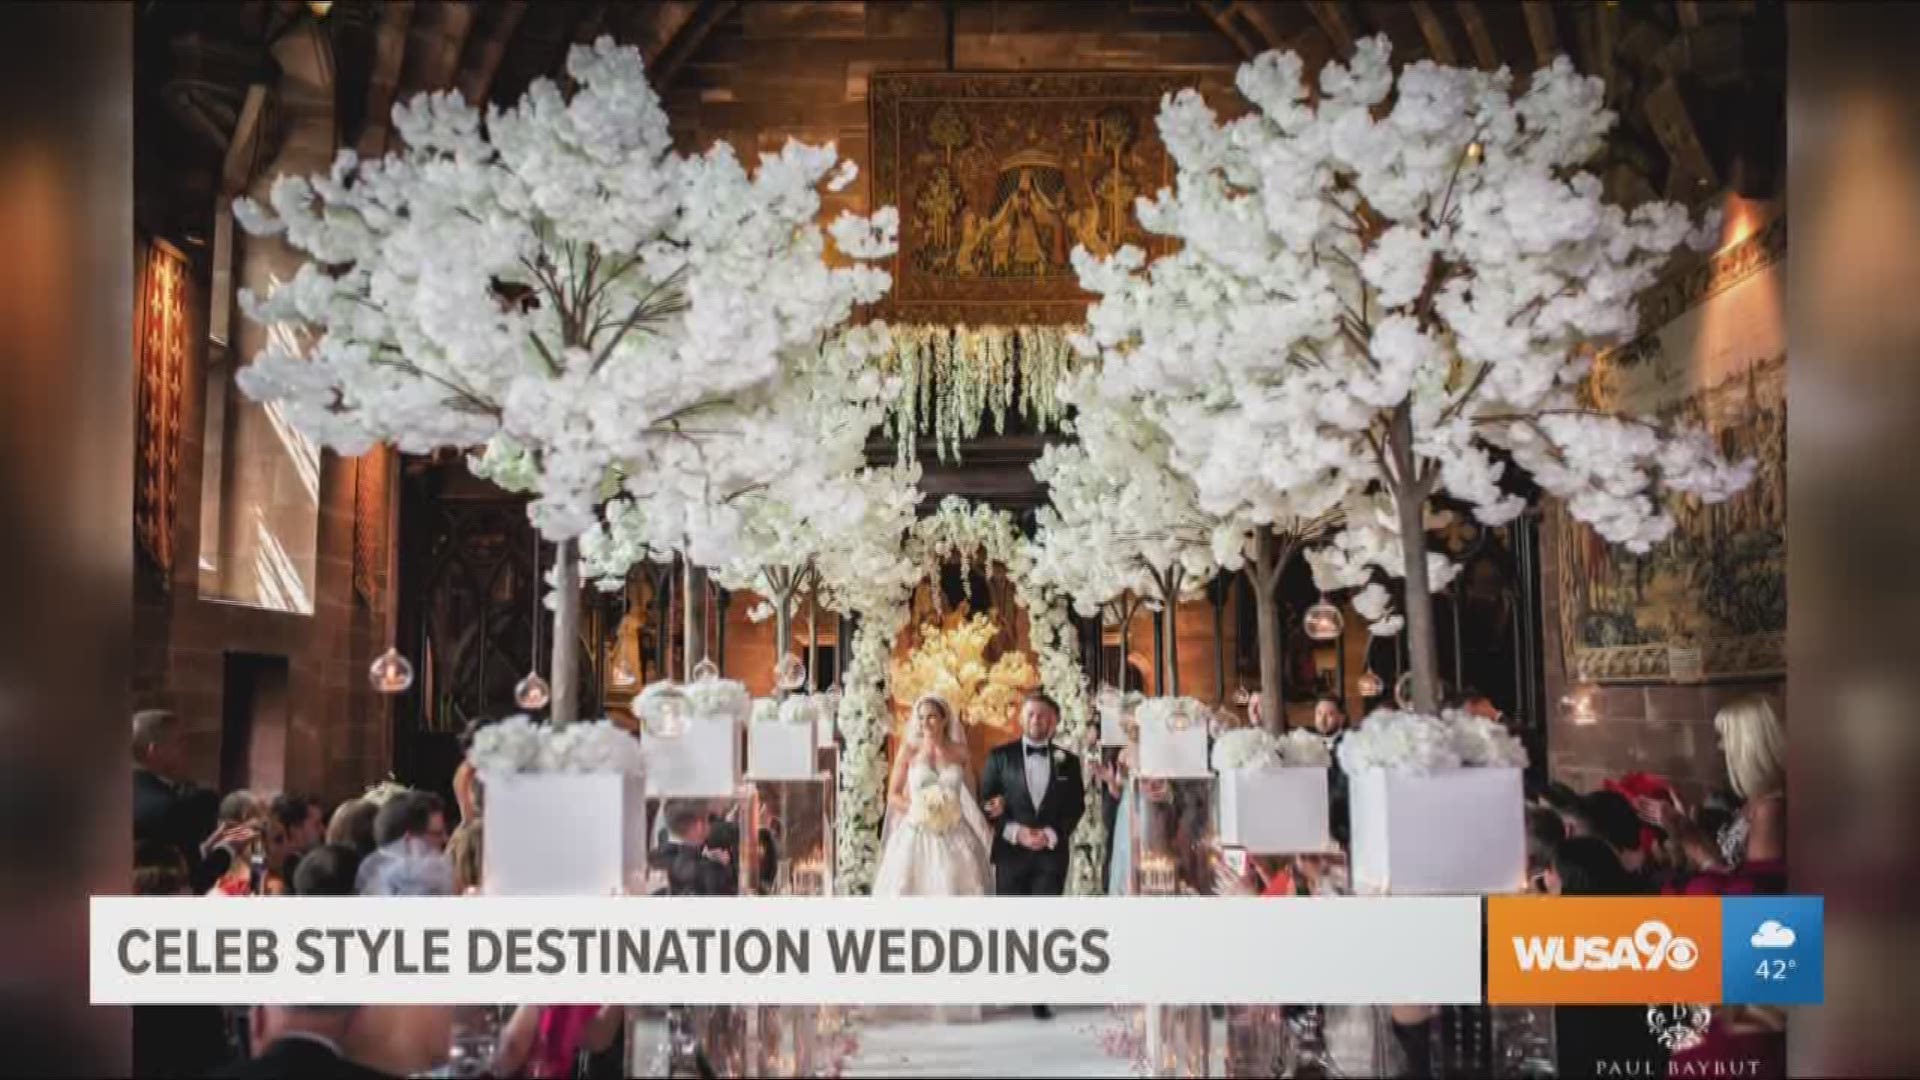 Amy Jarczynski founder of KissandTell.com shares tips on how to book a celeb style destination wedding, without breaking the bank.